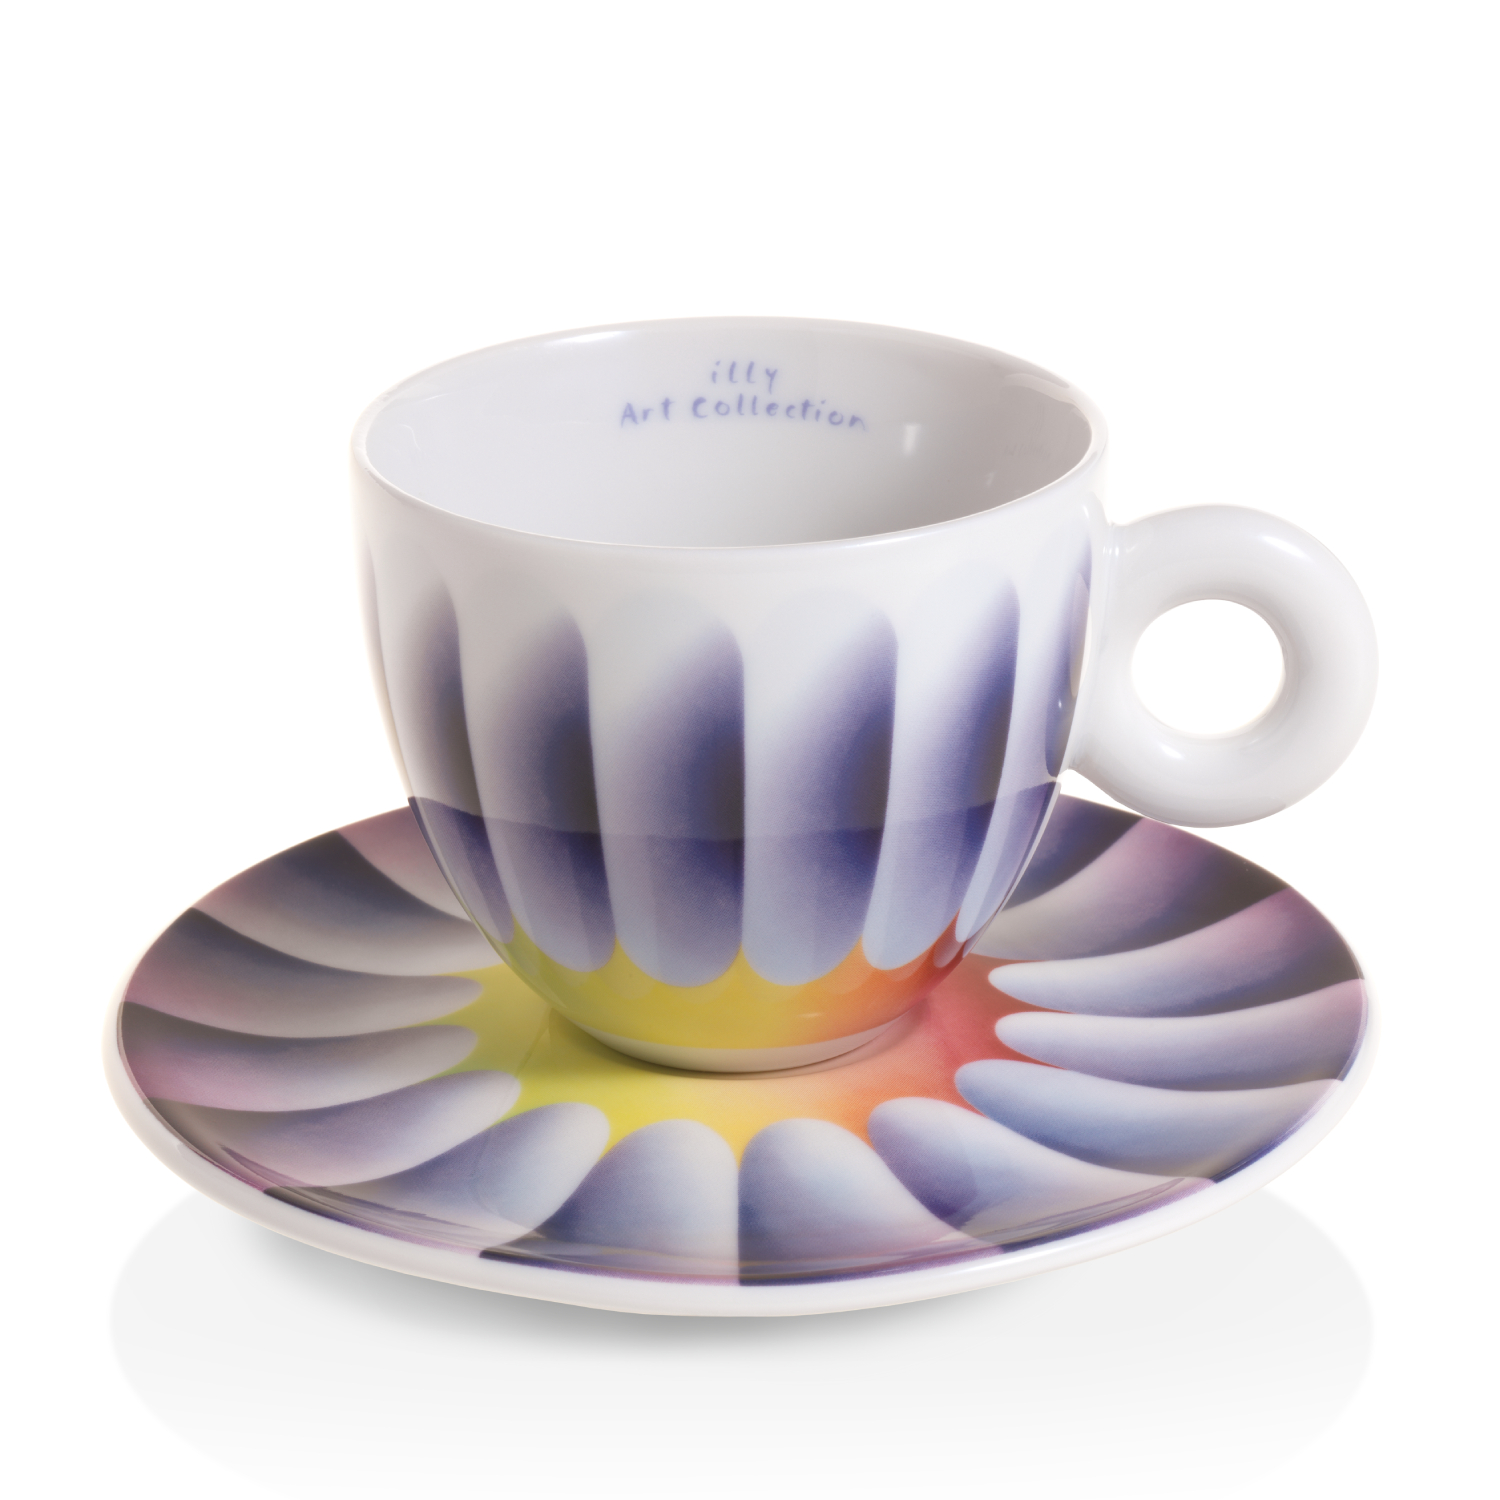 illy Art Collection JUDY CHICAGO Gift Set 2 Cappuccino Cups, Cups, 02-02-2016